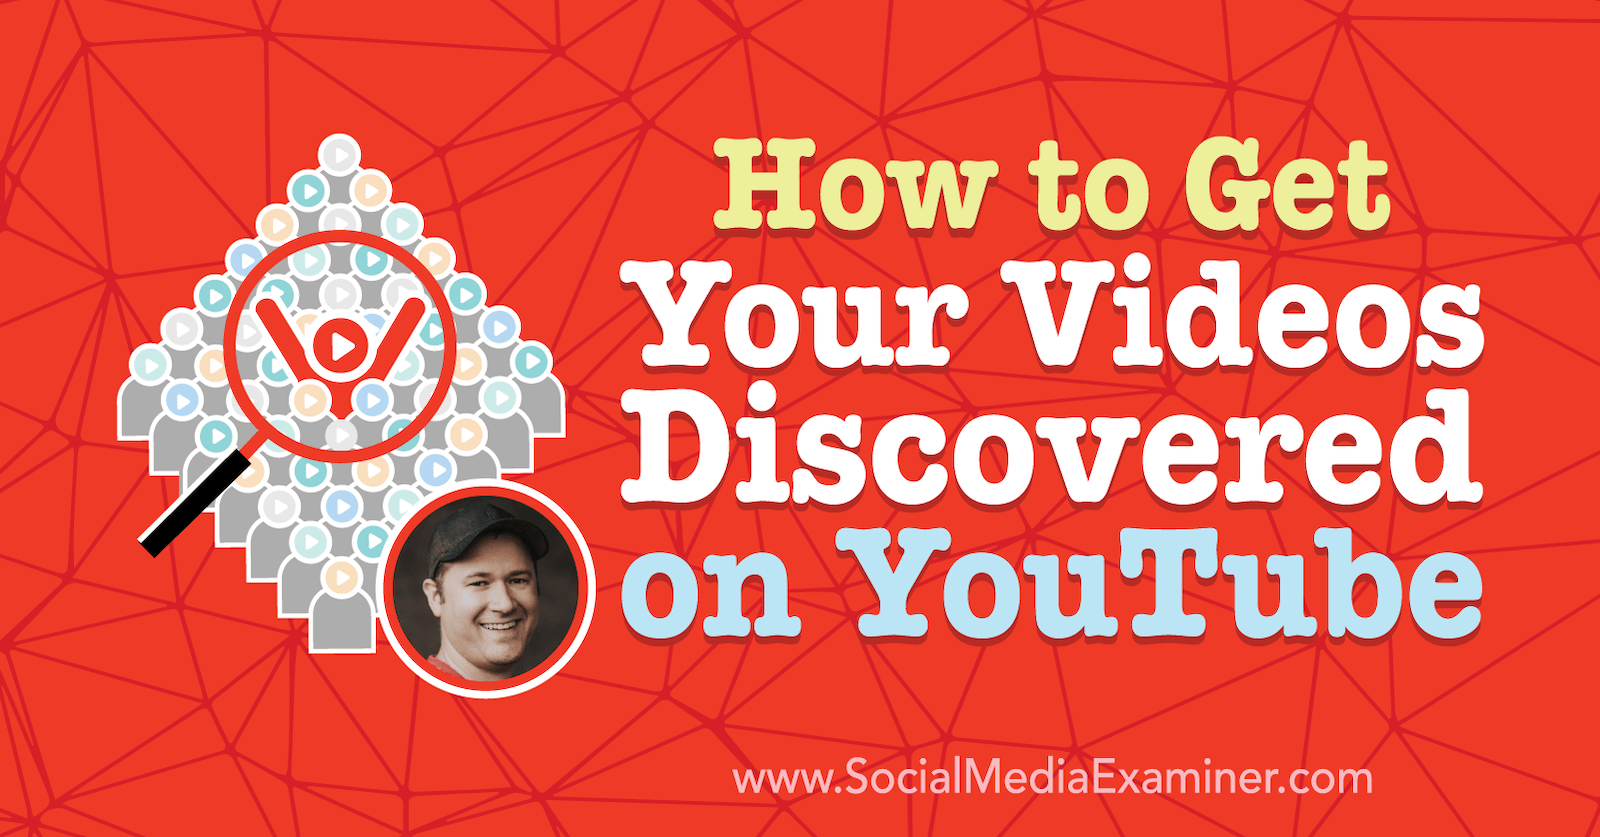 How To Get Your Videos Discovered On Youtube Social Media Examiner